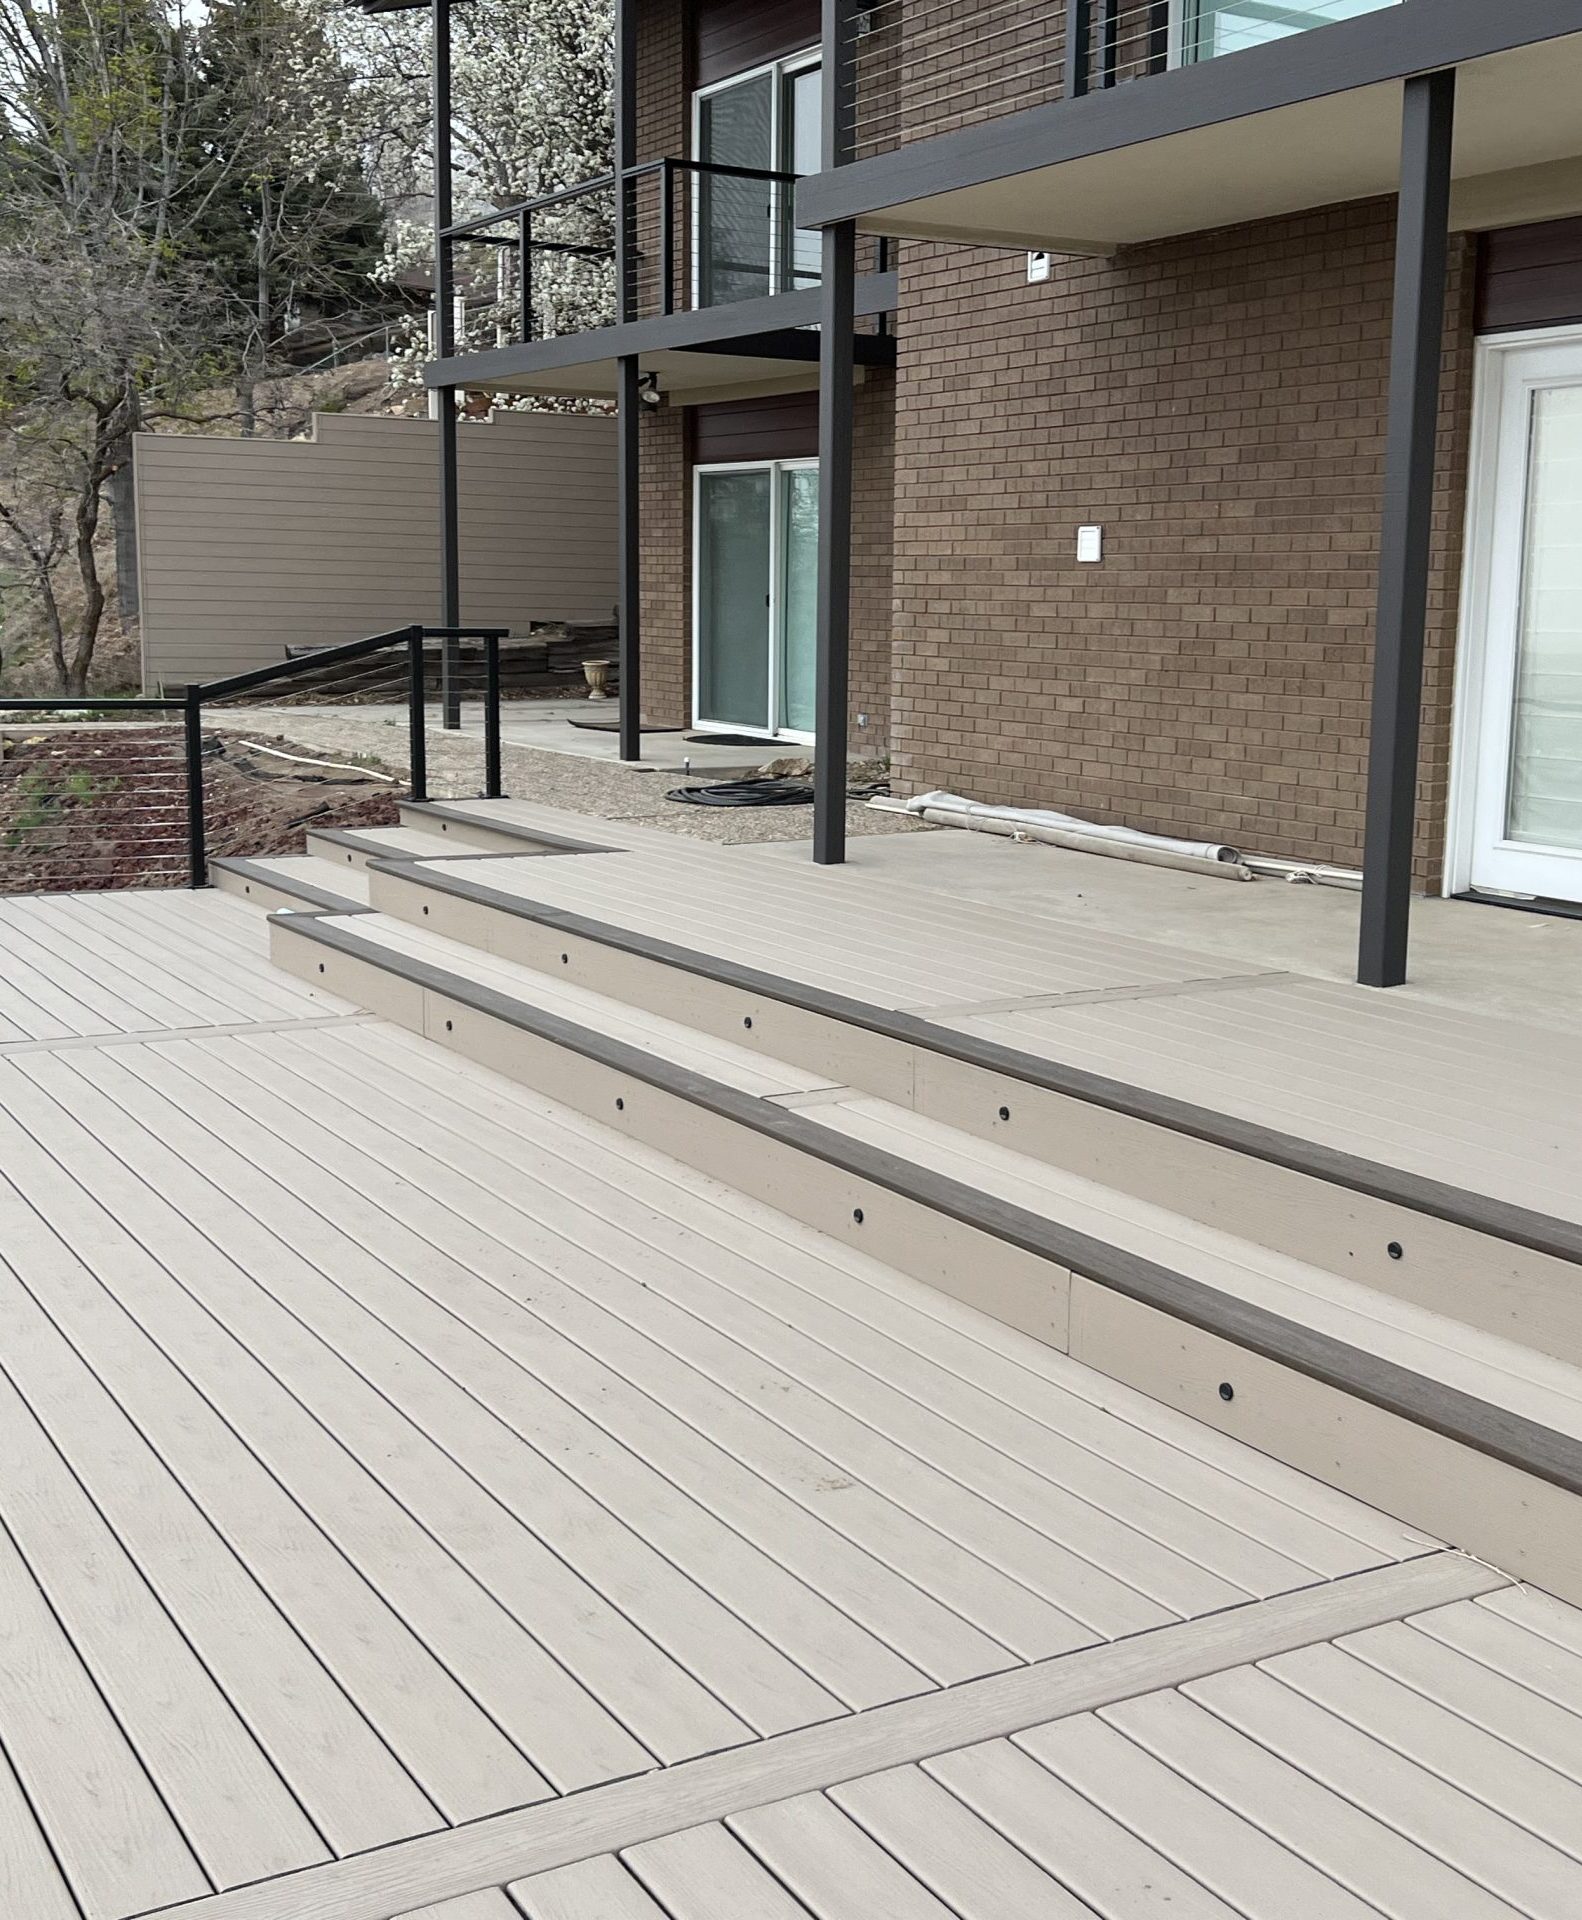 Upgrade your living space with a custom deck from Blackrock Decks. Our deck builders in Kaysville, Utah specialize in backyard improvements.